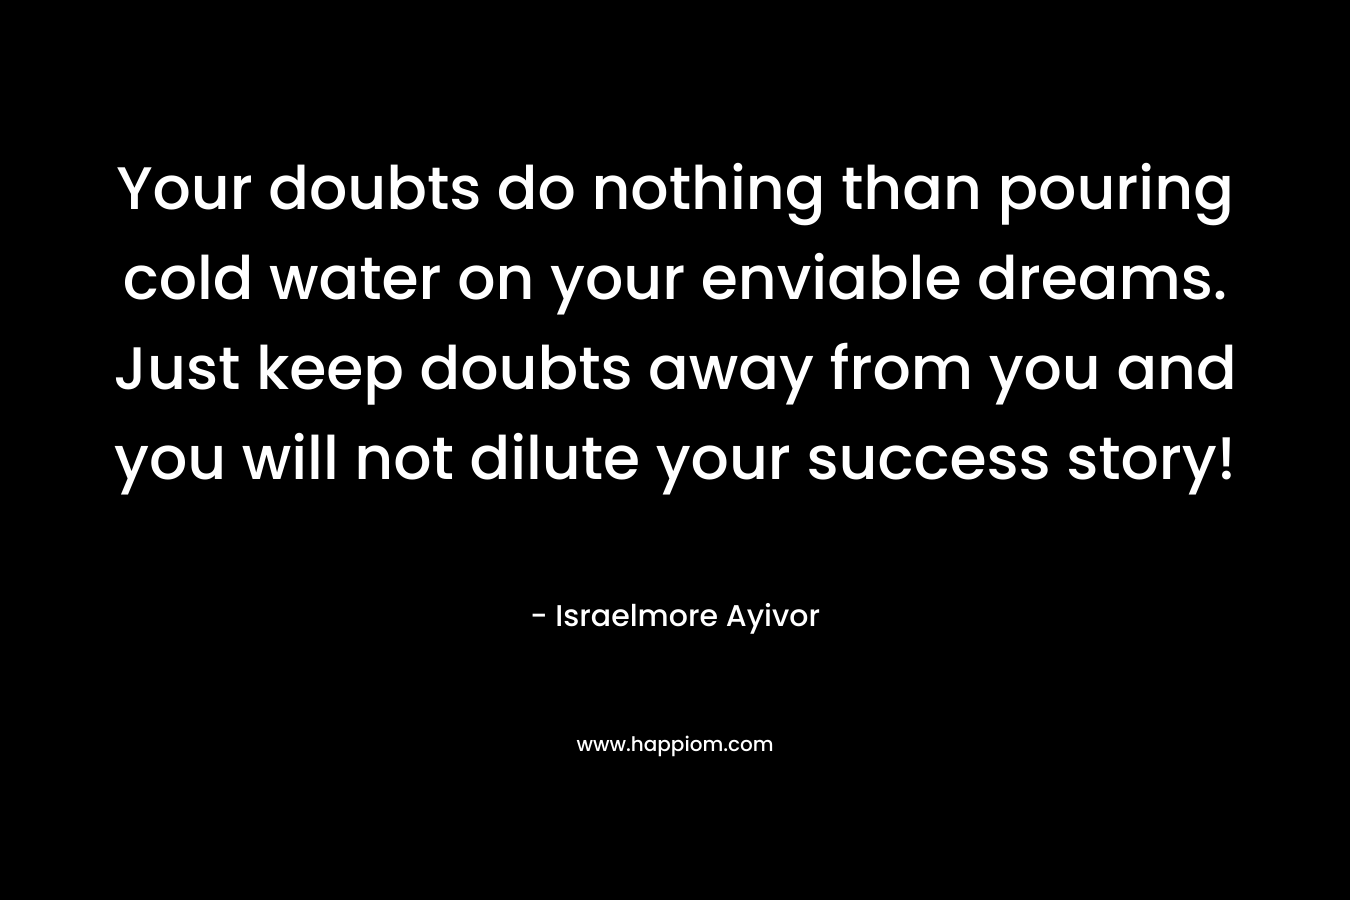 Your doubts do nothing than pouring cold water on your enviable dreams. Just keep doubts away from you and you will not dilute your success story!